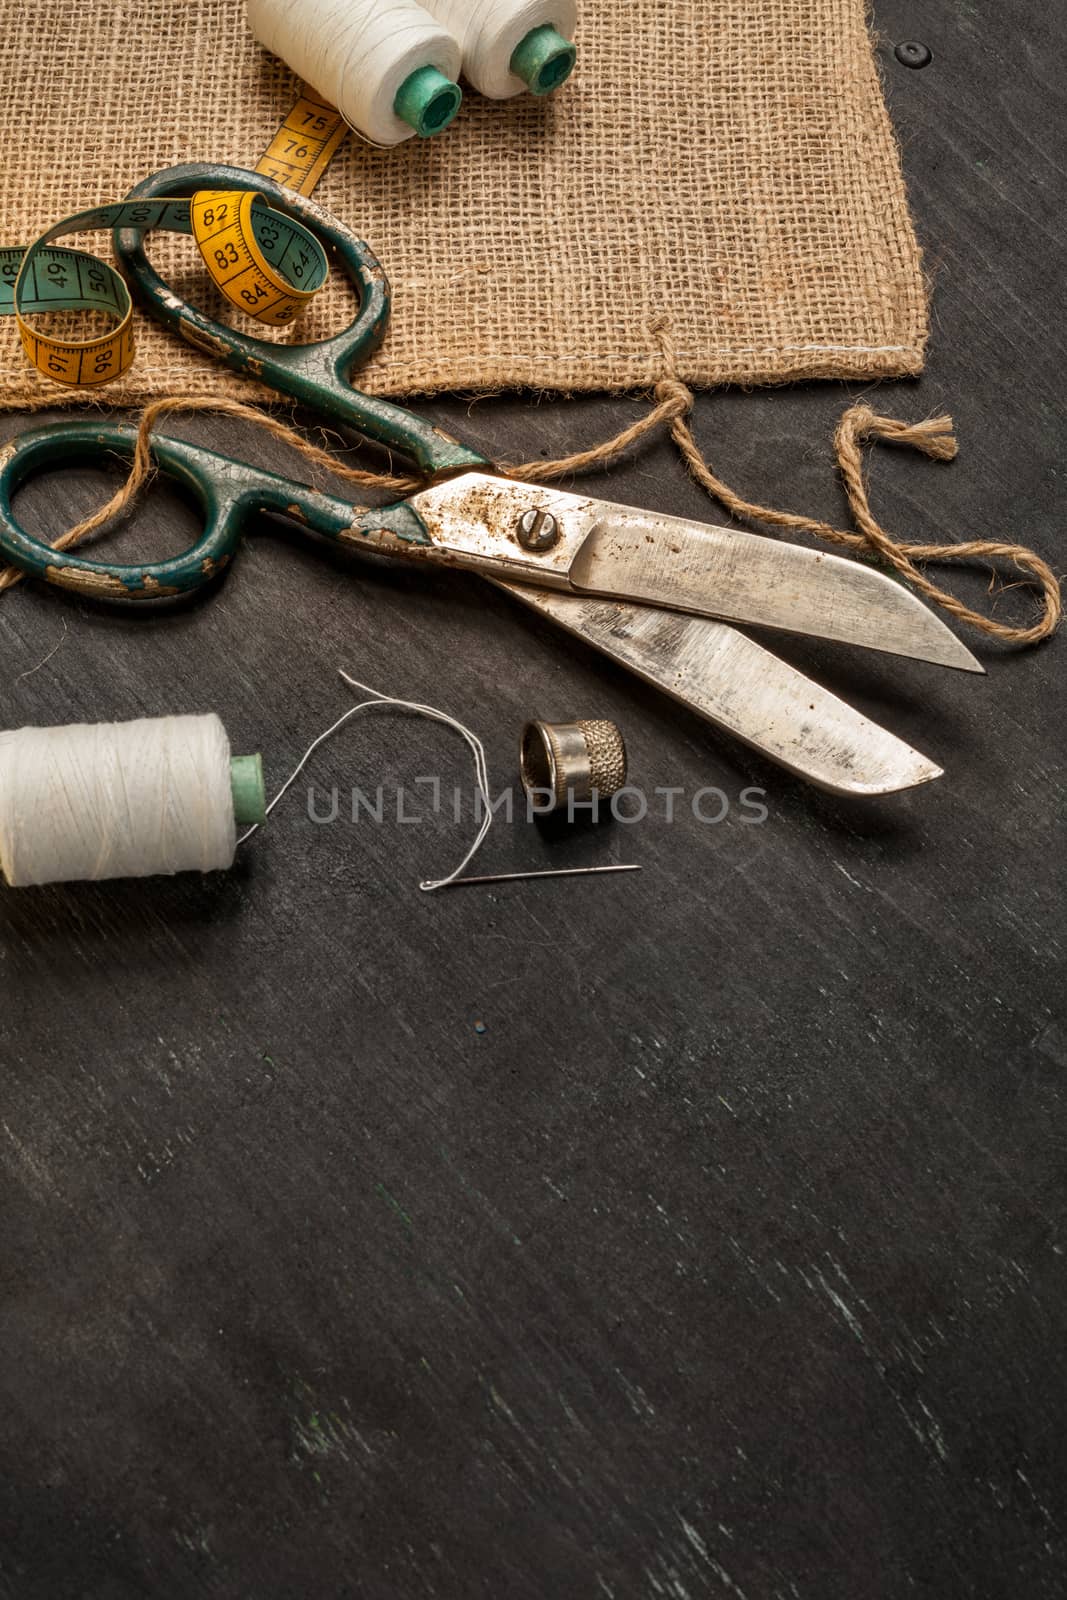 Retro sewing accessories on black wooden background by igor_stramyk